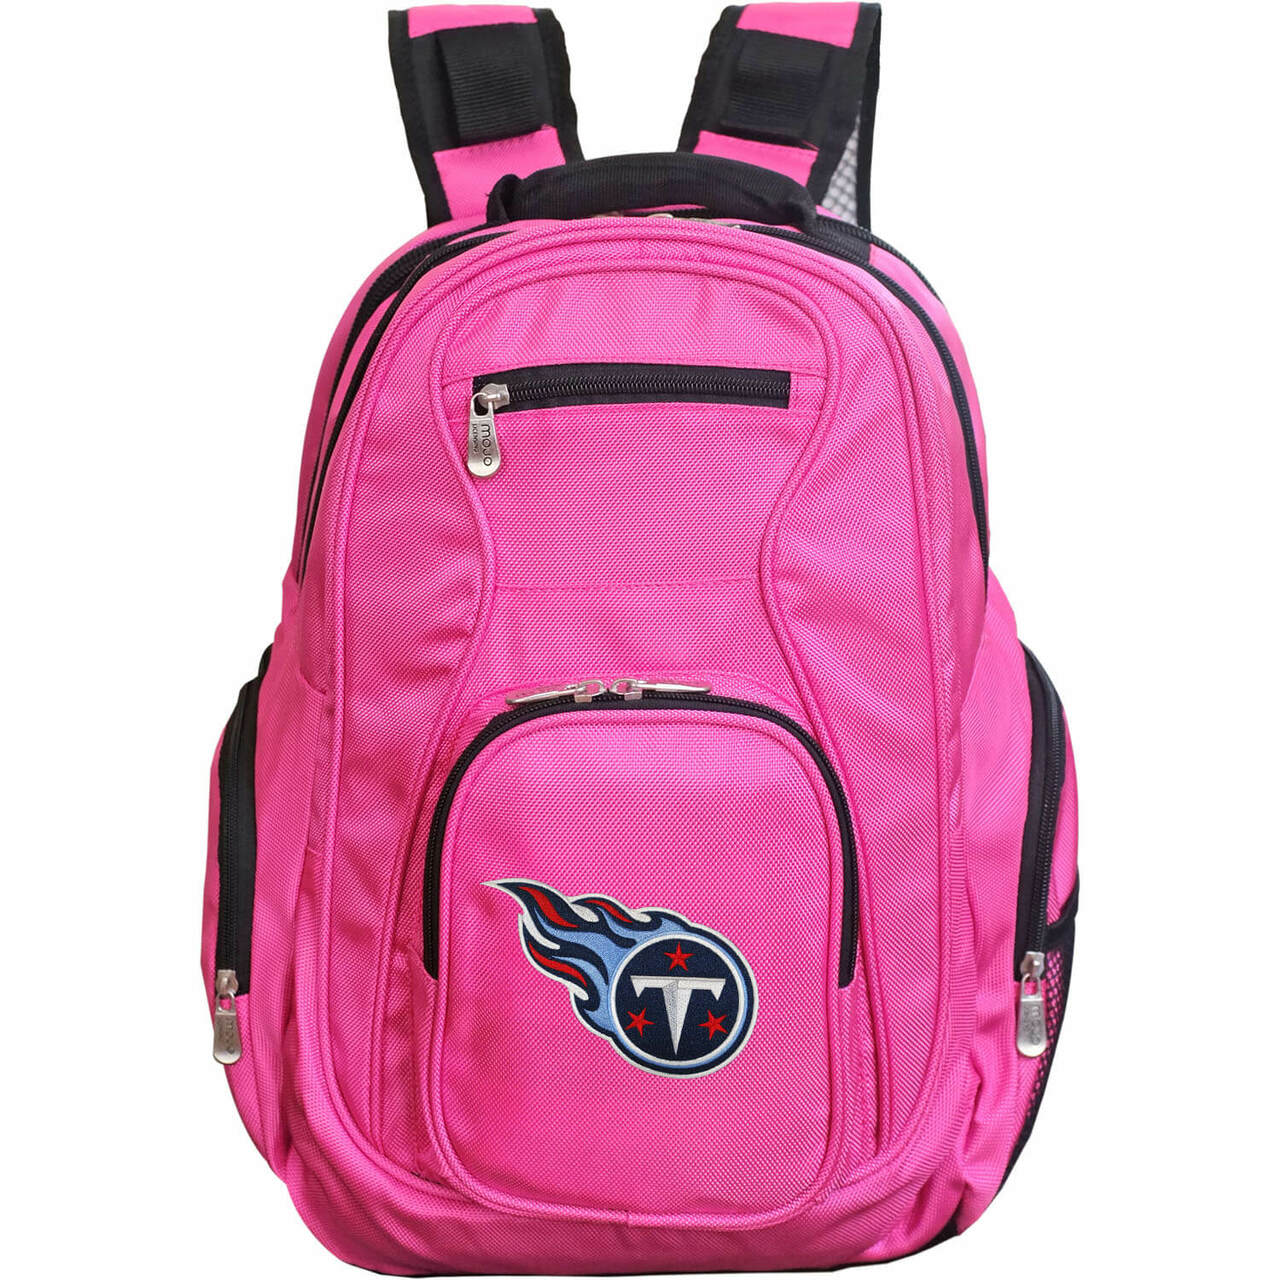 Titans Backpack | Tennessee Titans Laptop Backpack- Pink